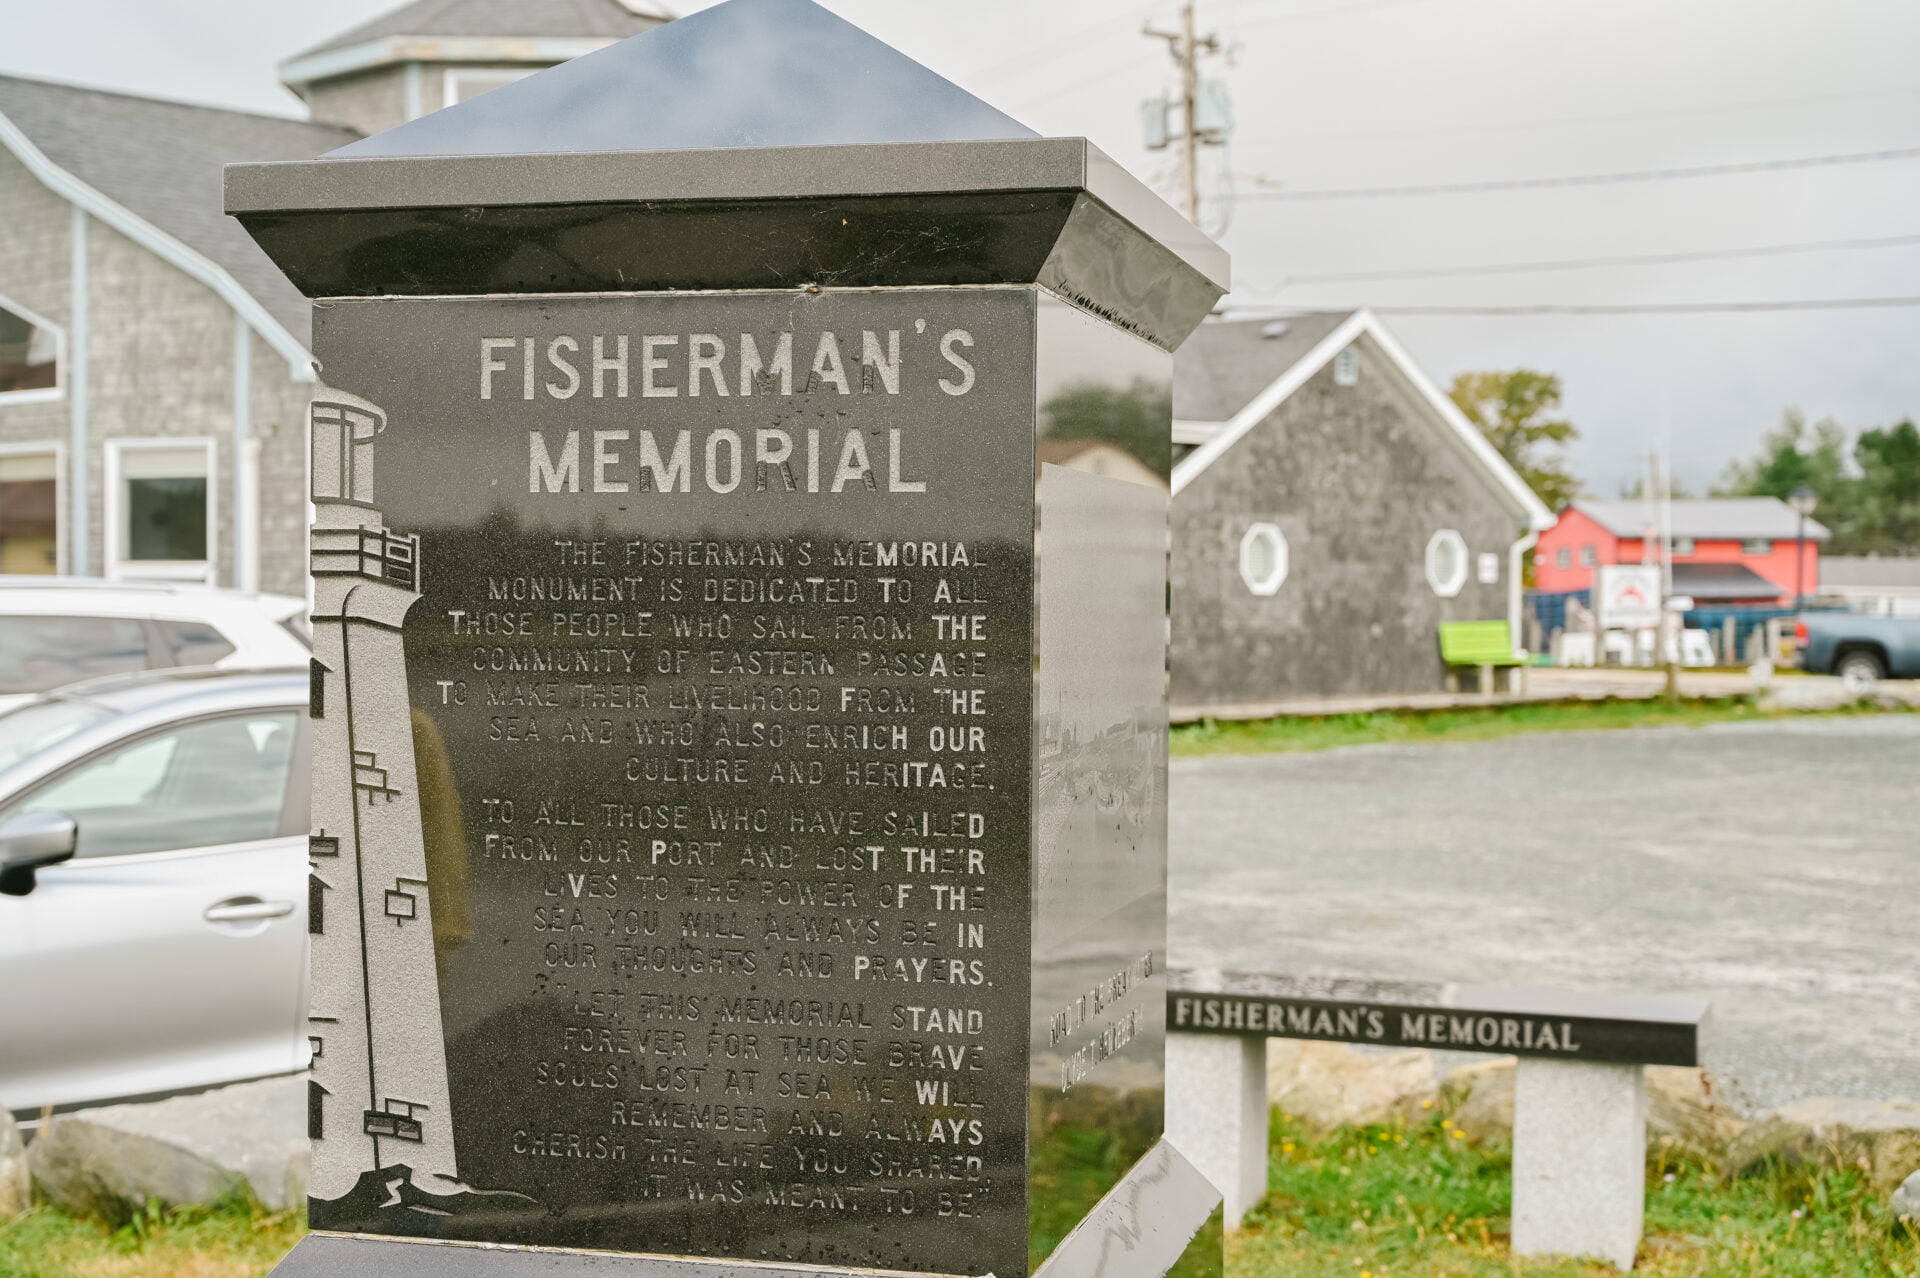 close up view of the fisherman's memorial marker